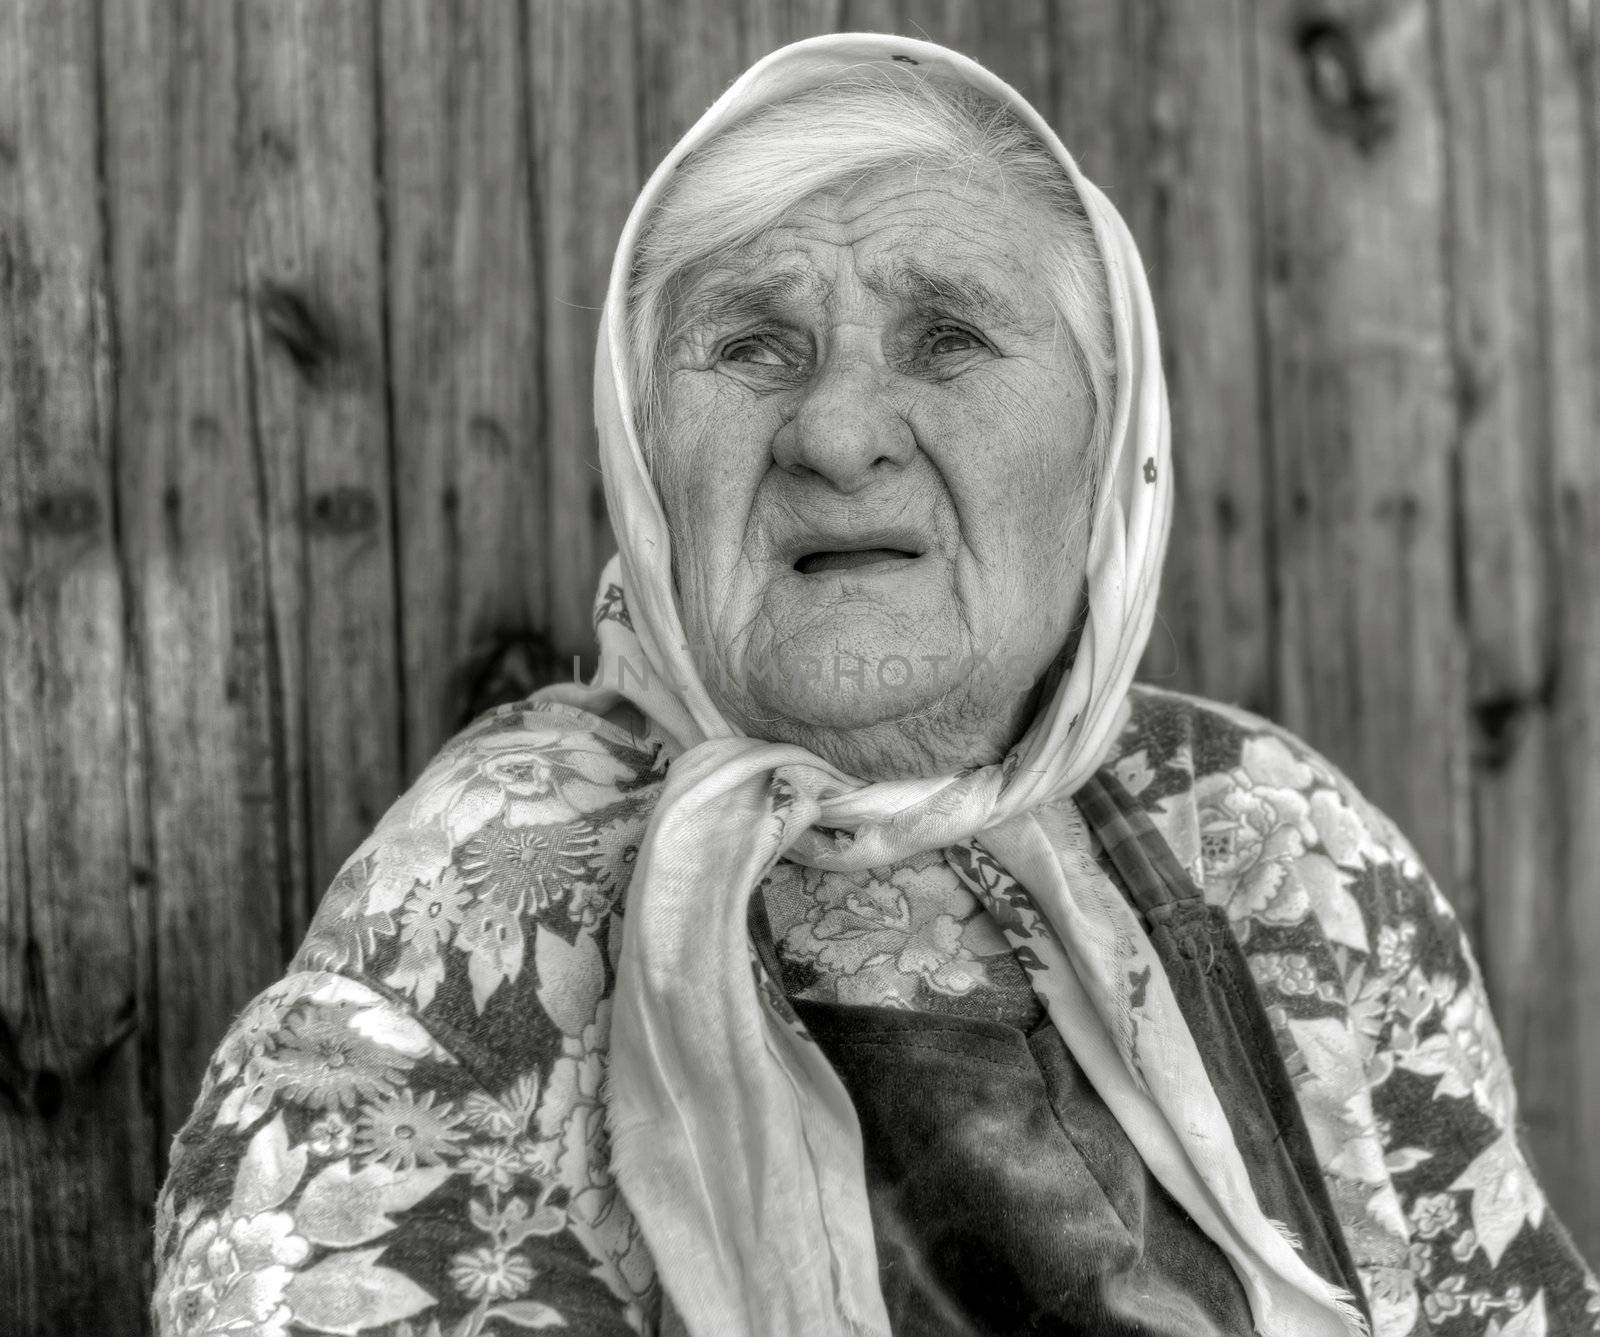 The old woman age 84 years by galdzer